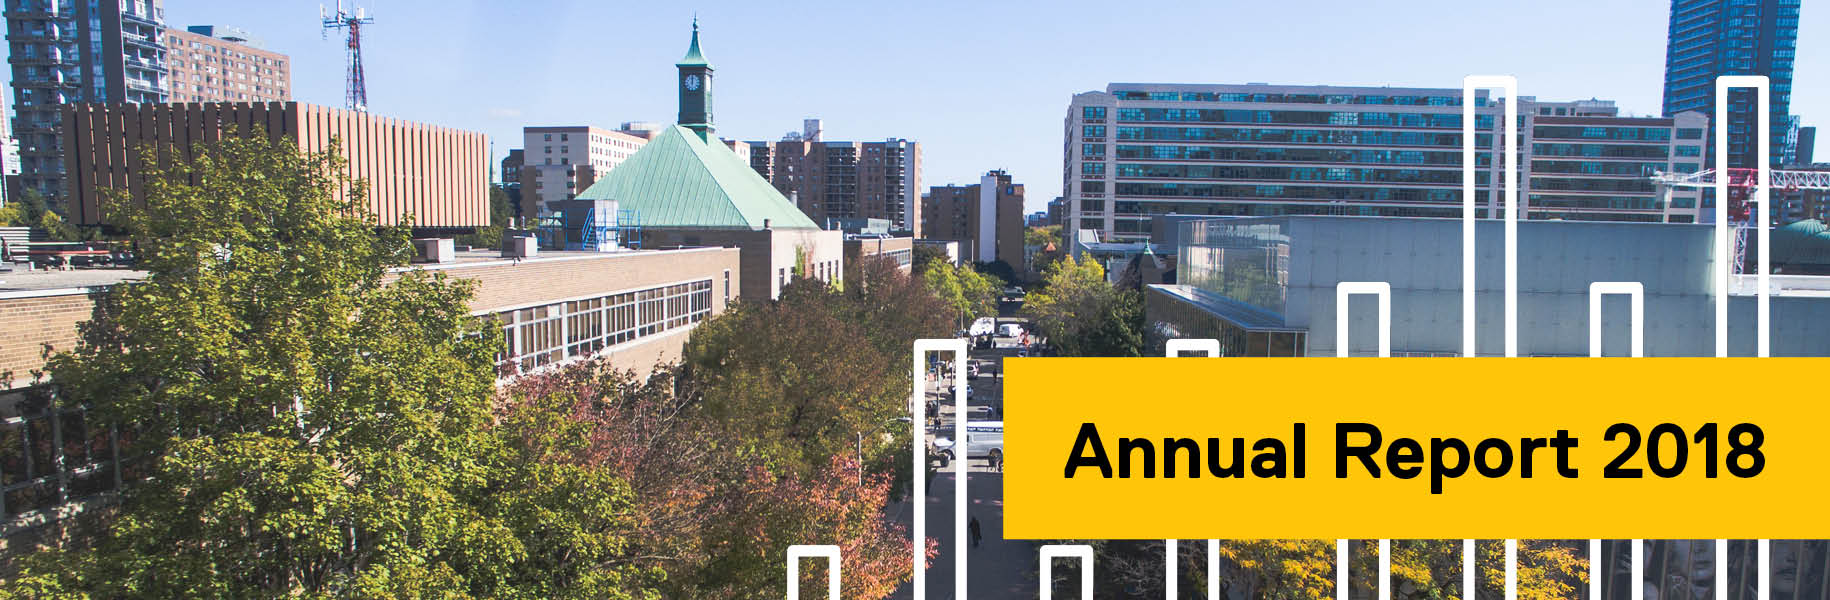 Annual Report 2018: Wide shot of the Ryerson campus showing trees and the clock tower